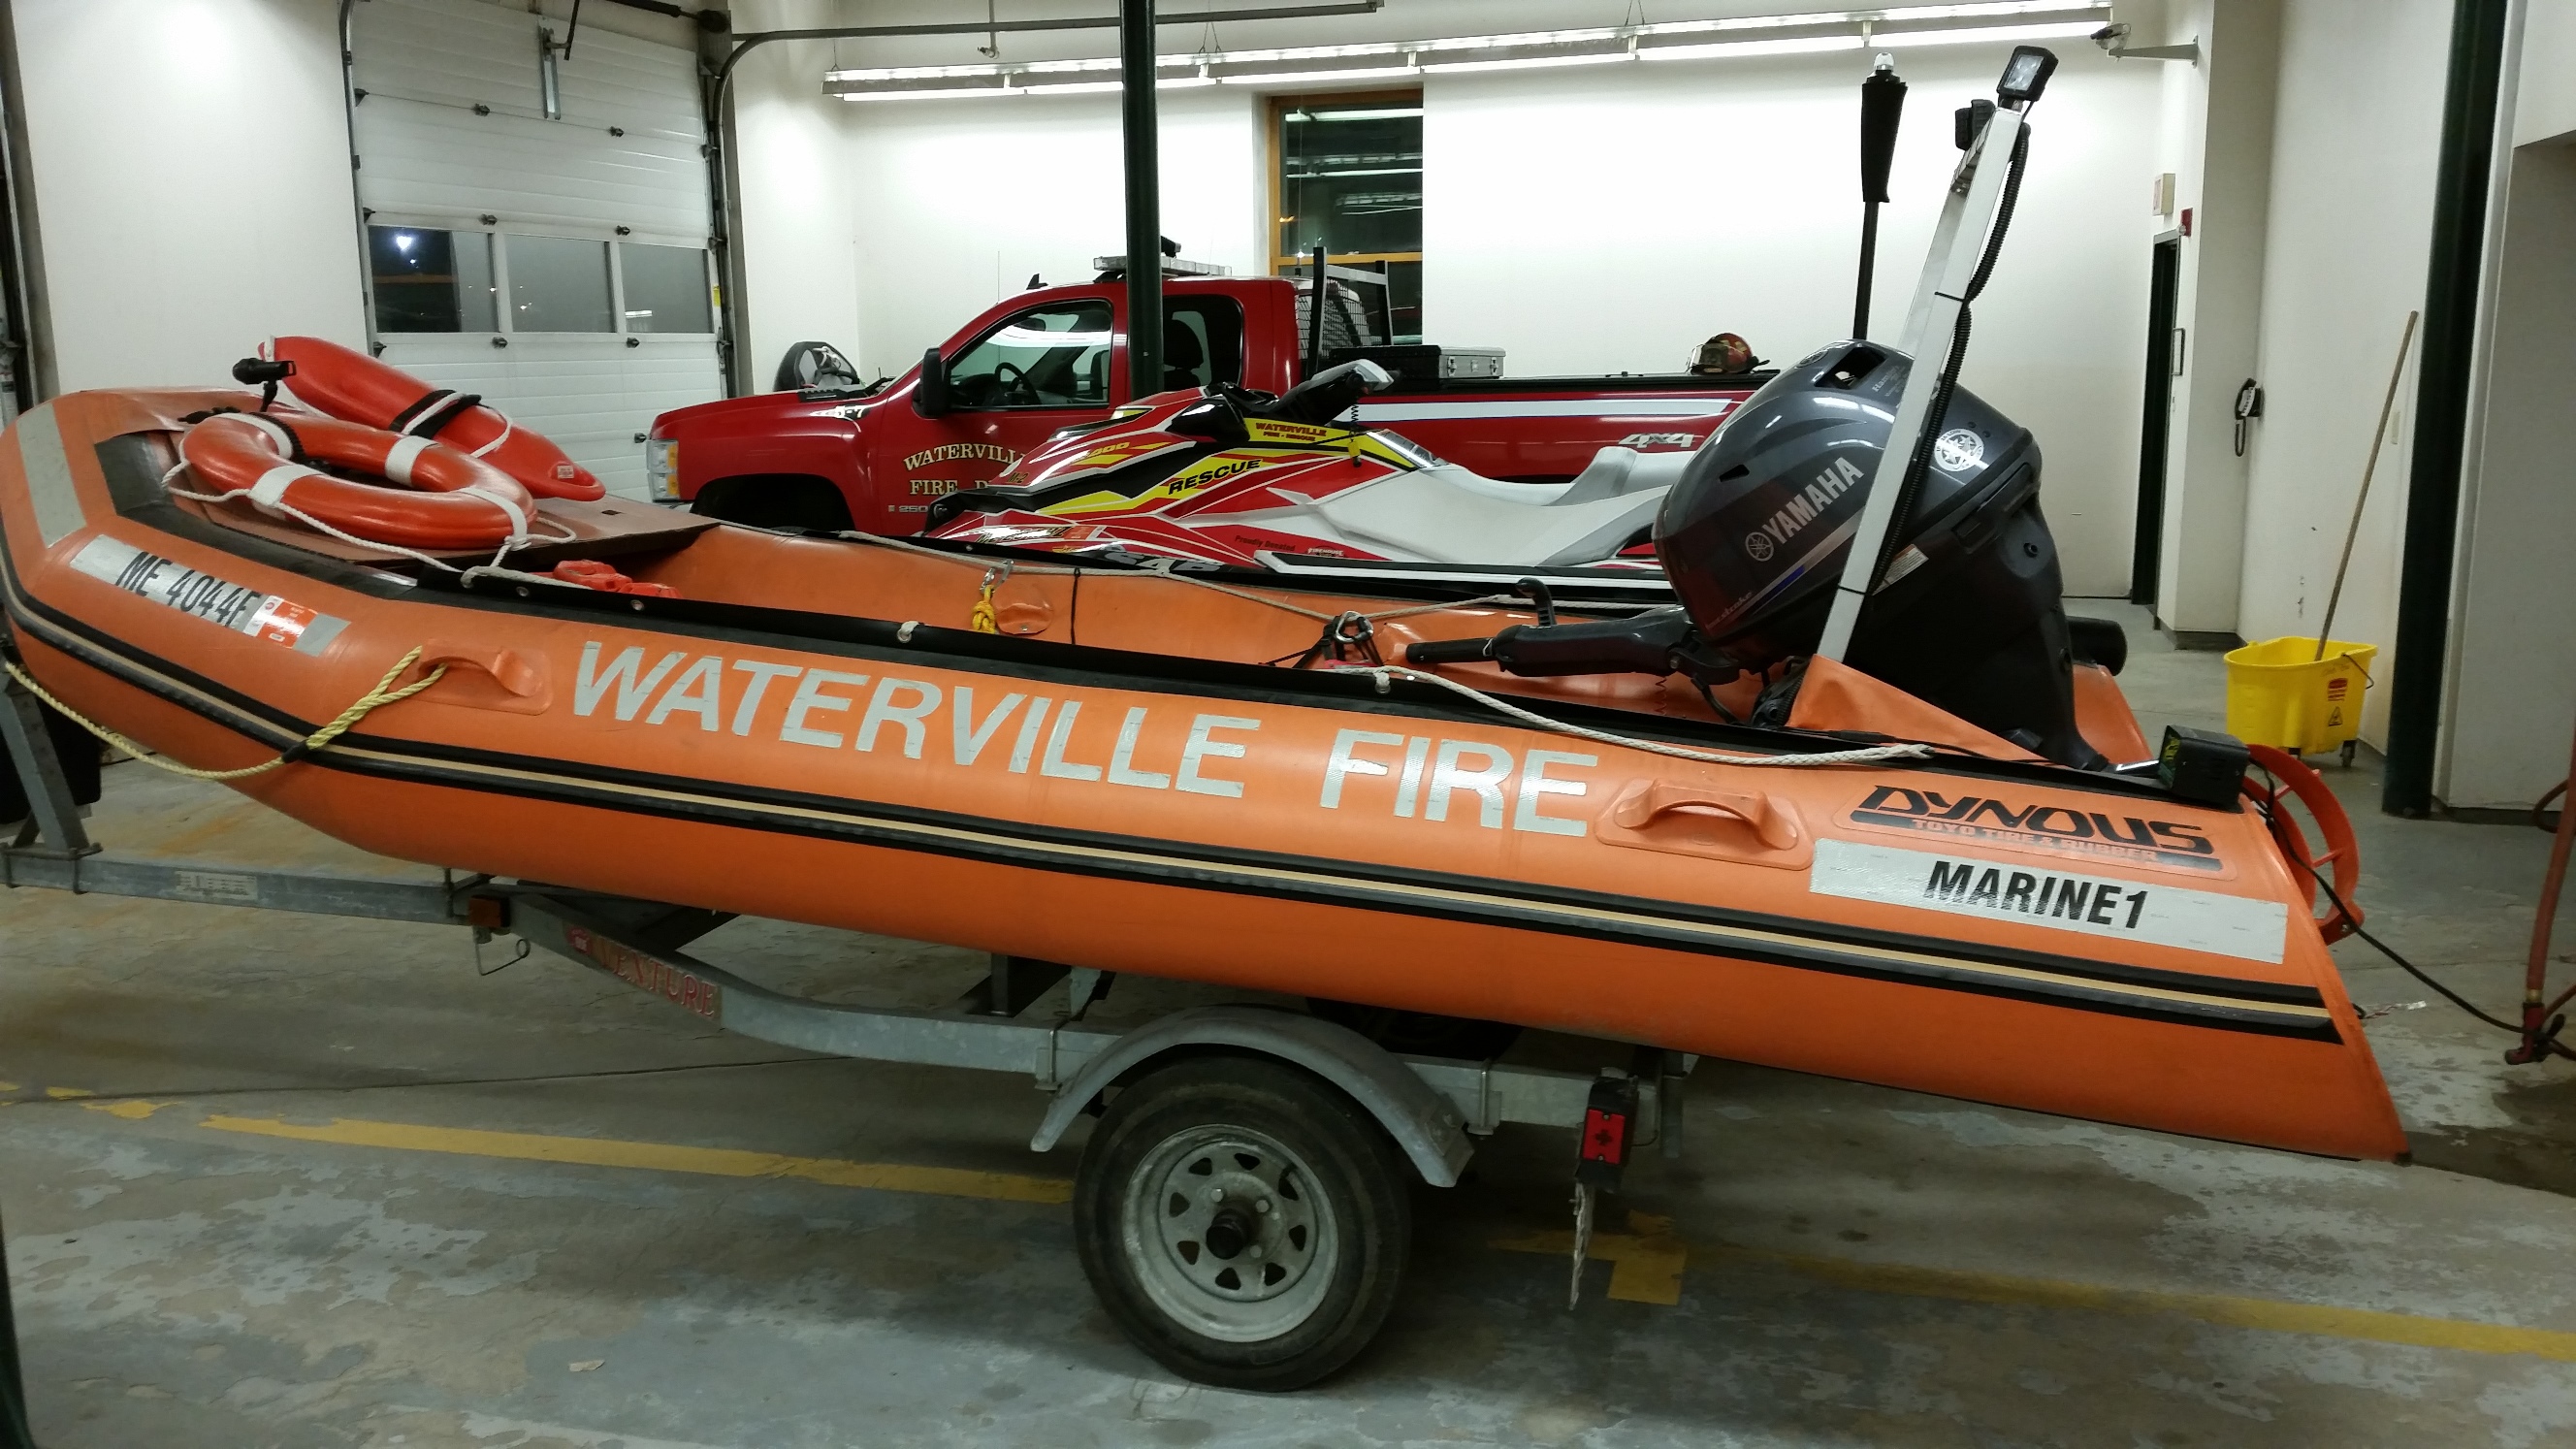 Picture of the right side Rescue Boat